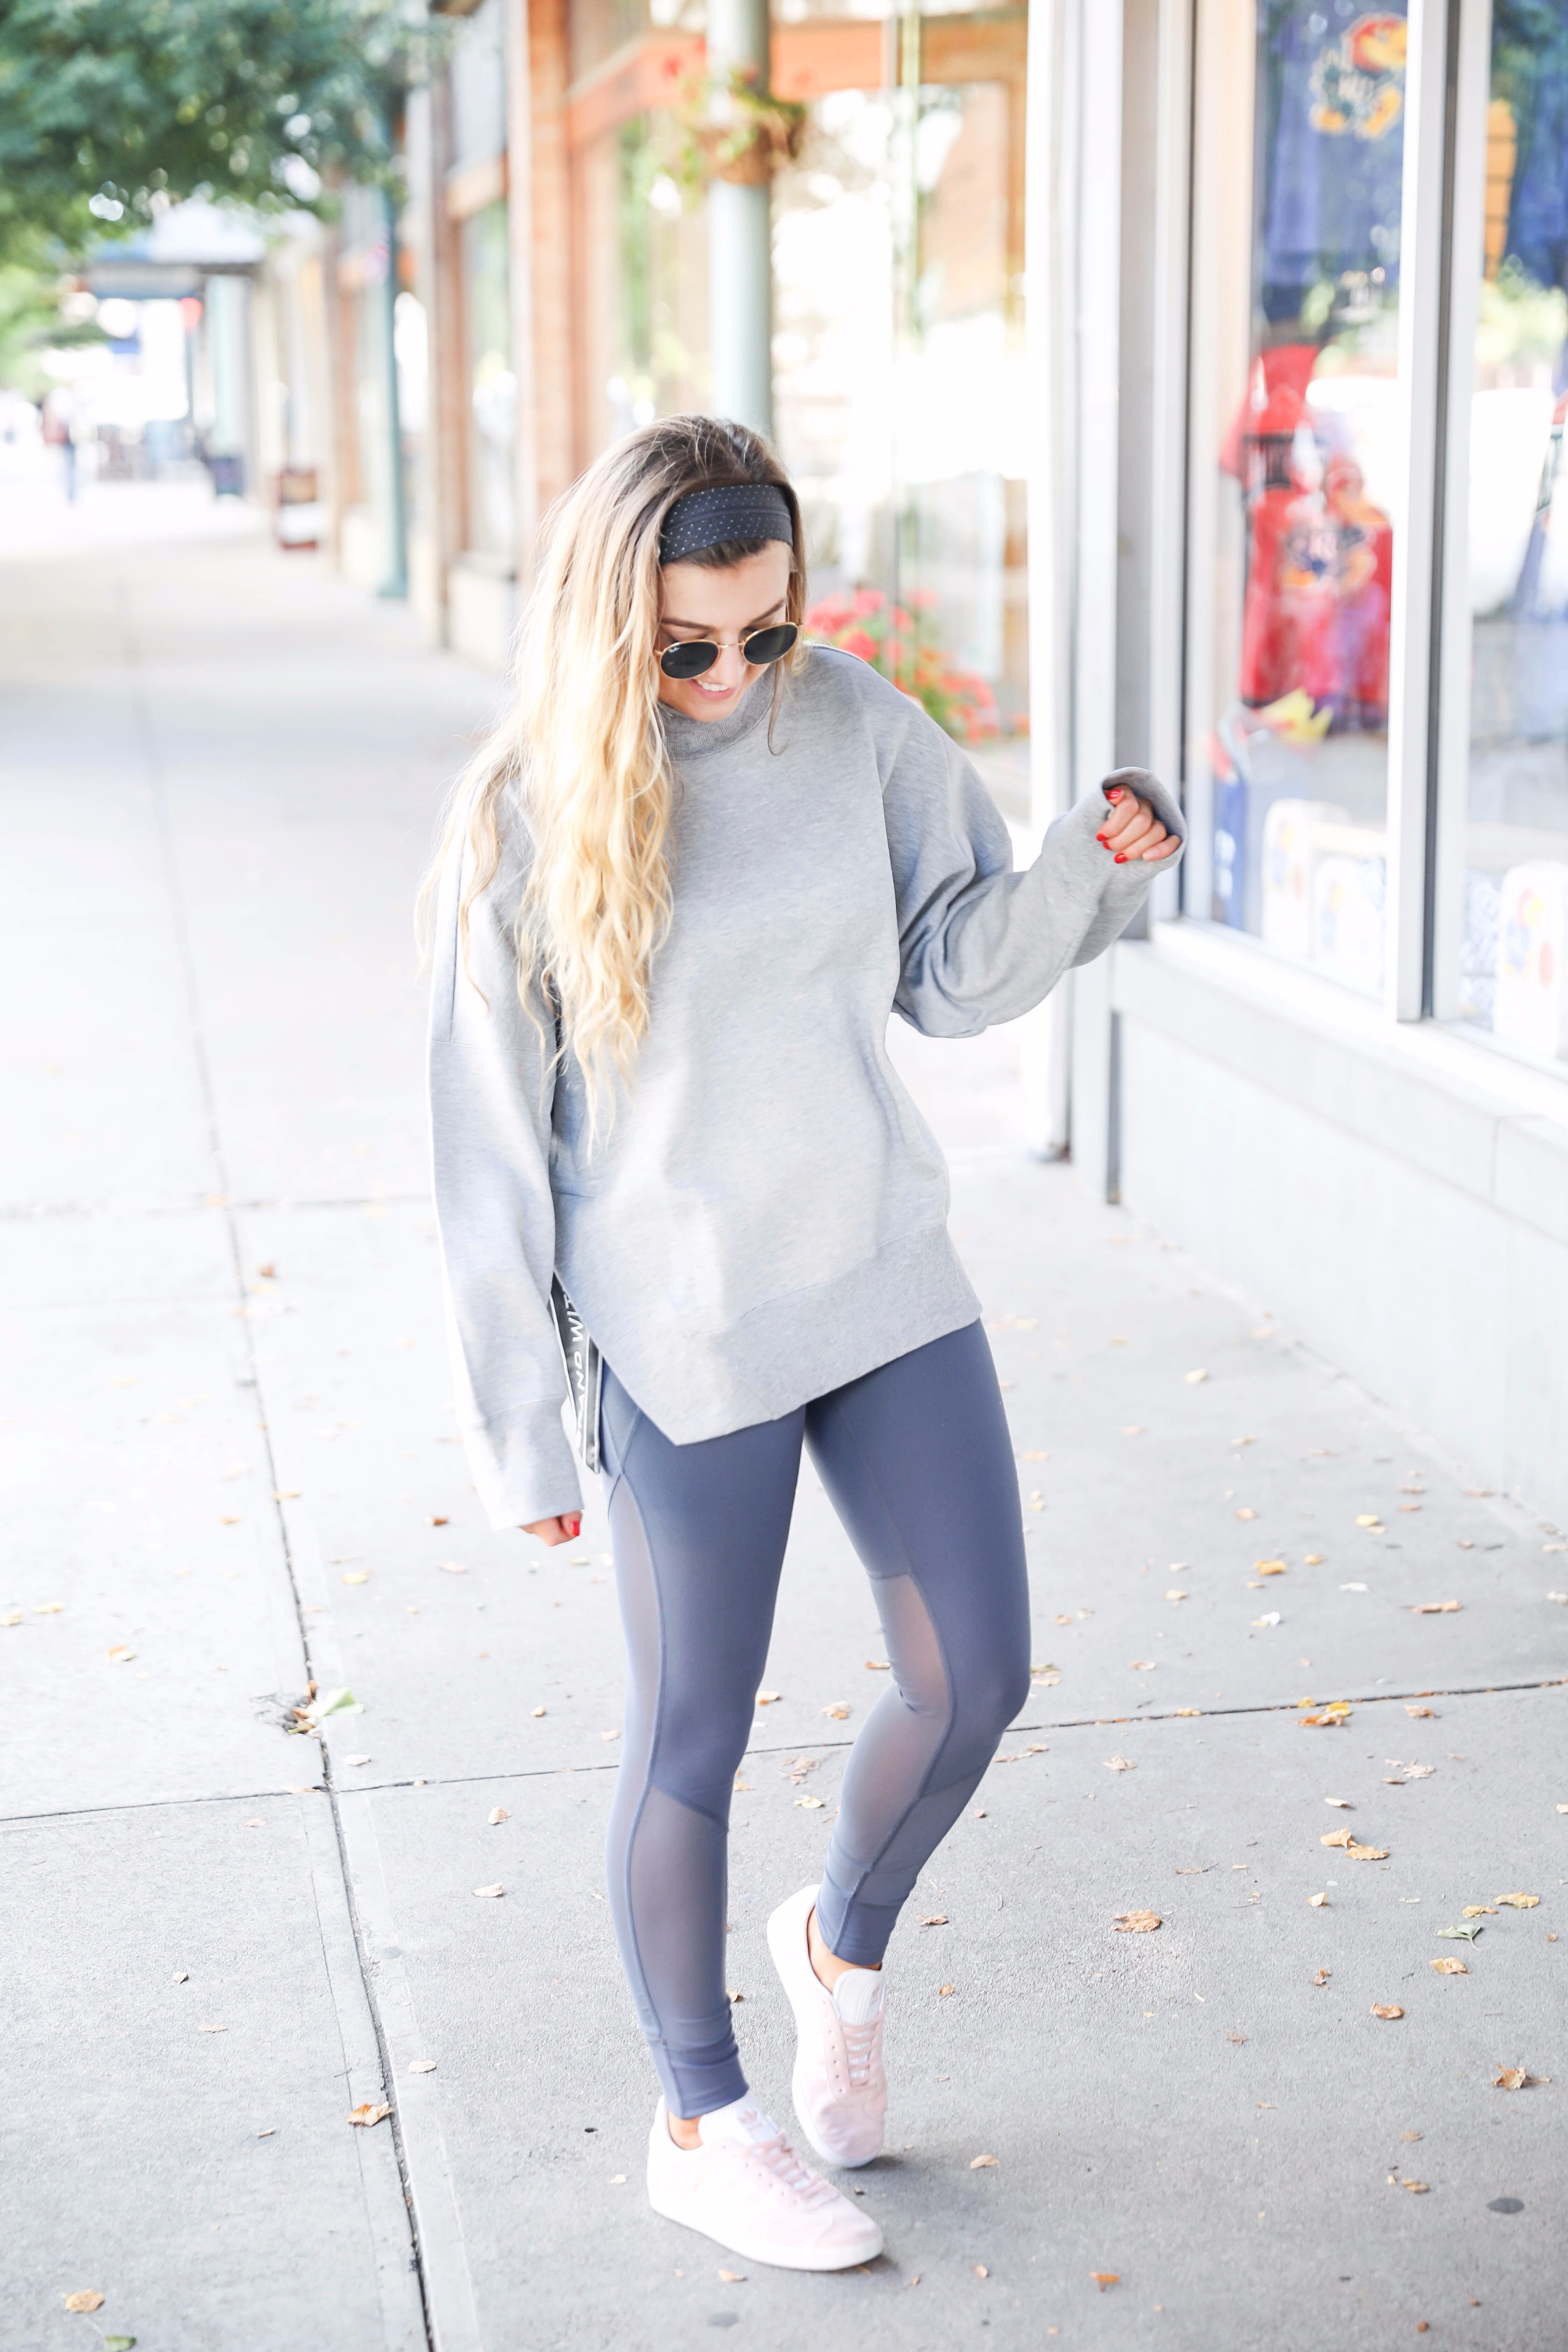 Grey Leggings with White and Red Shoes Outfits (7 ideas & outfits) |  Lookastic